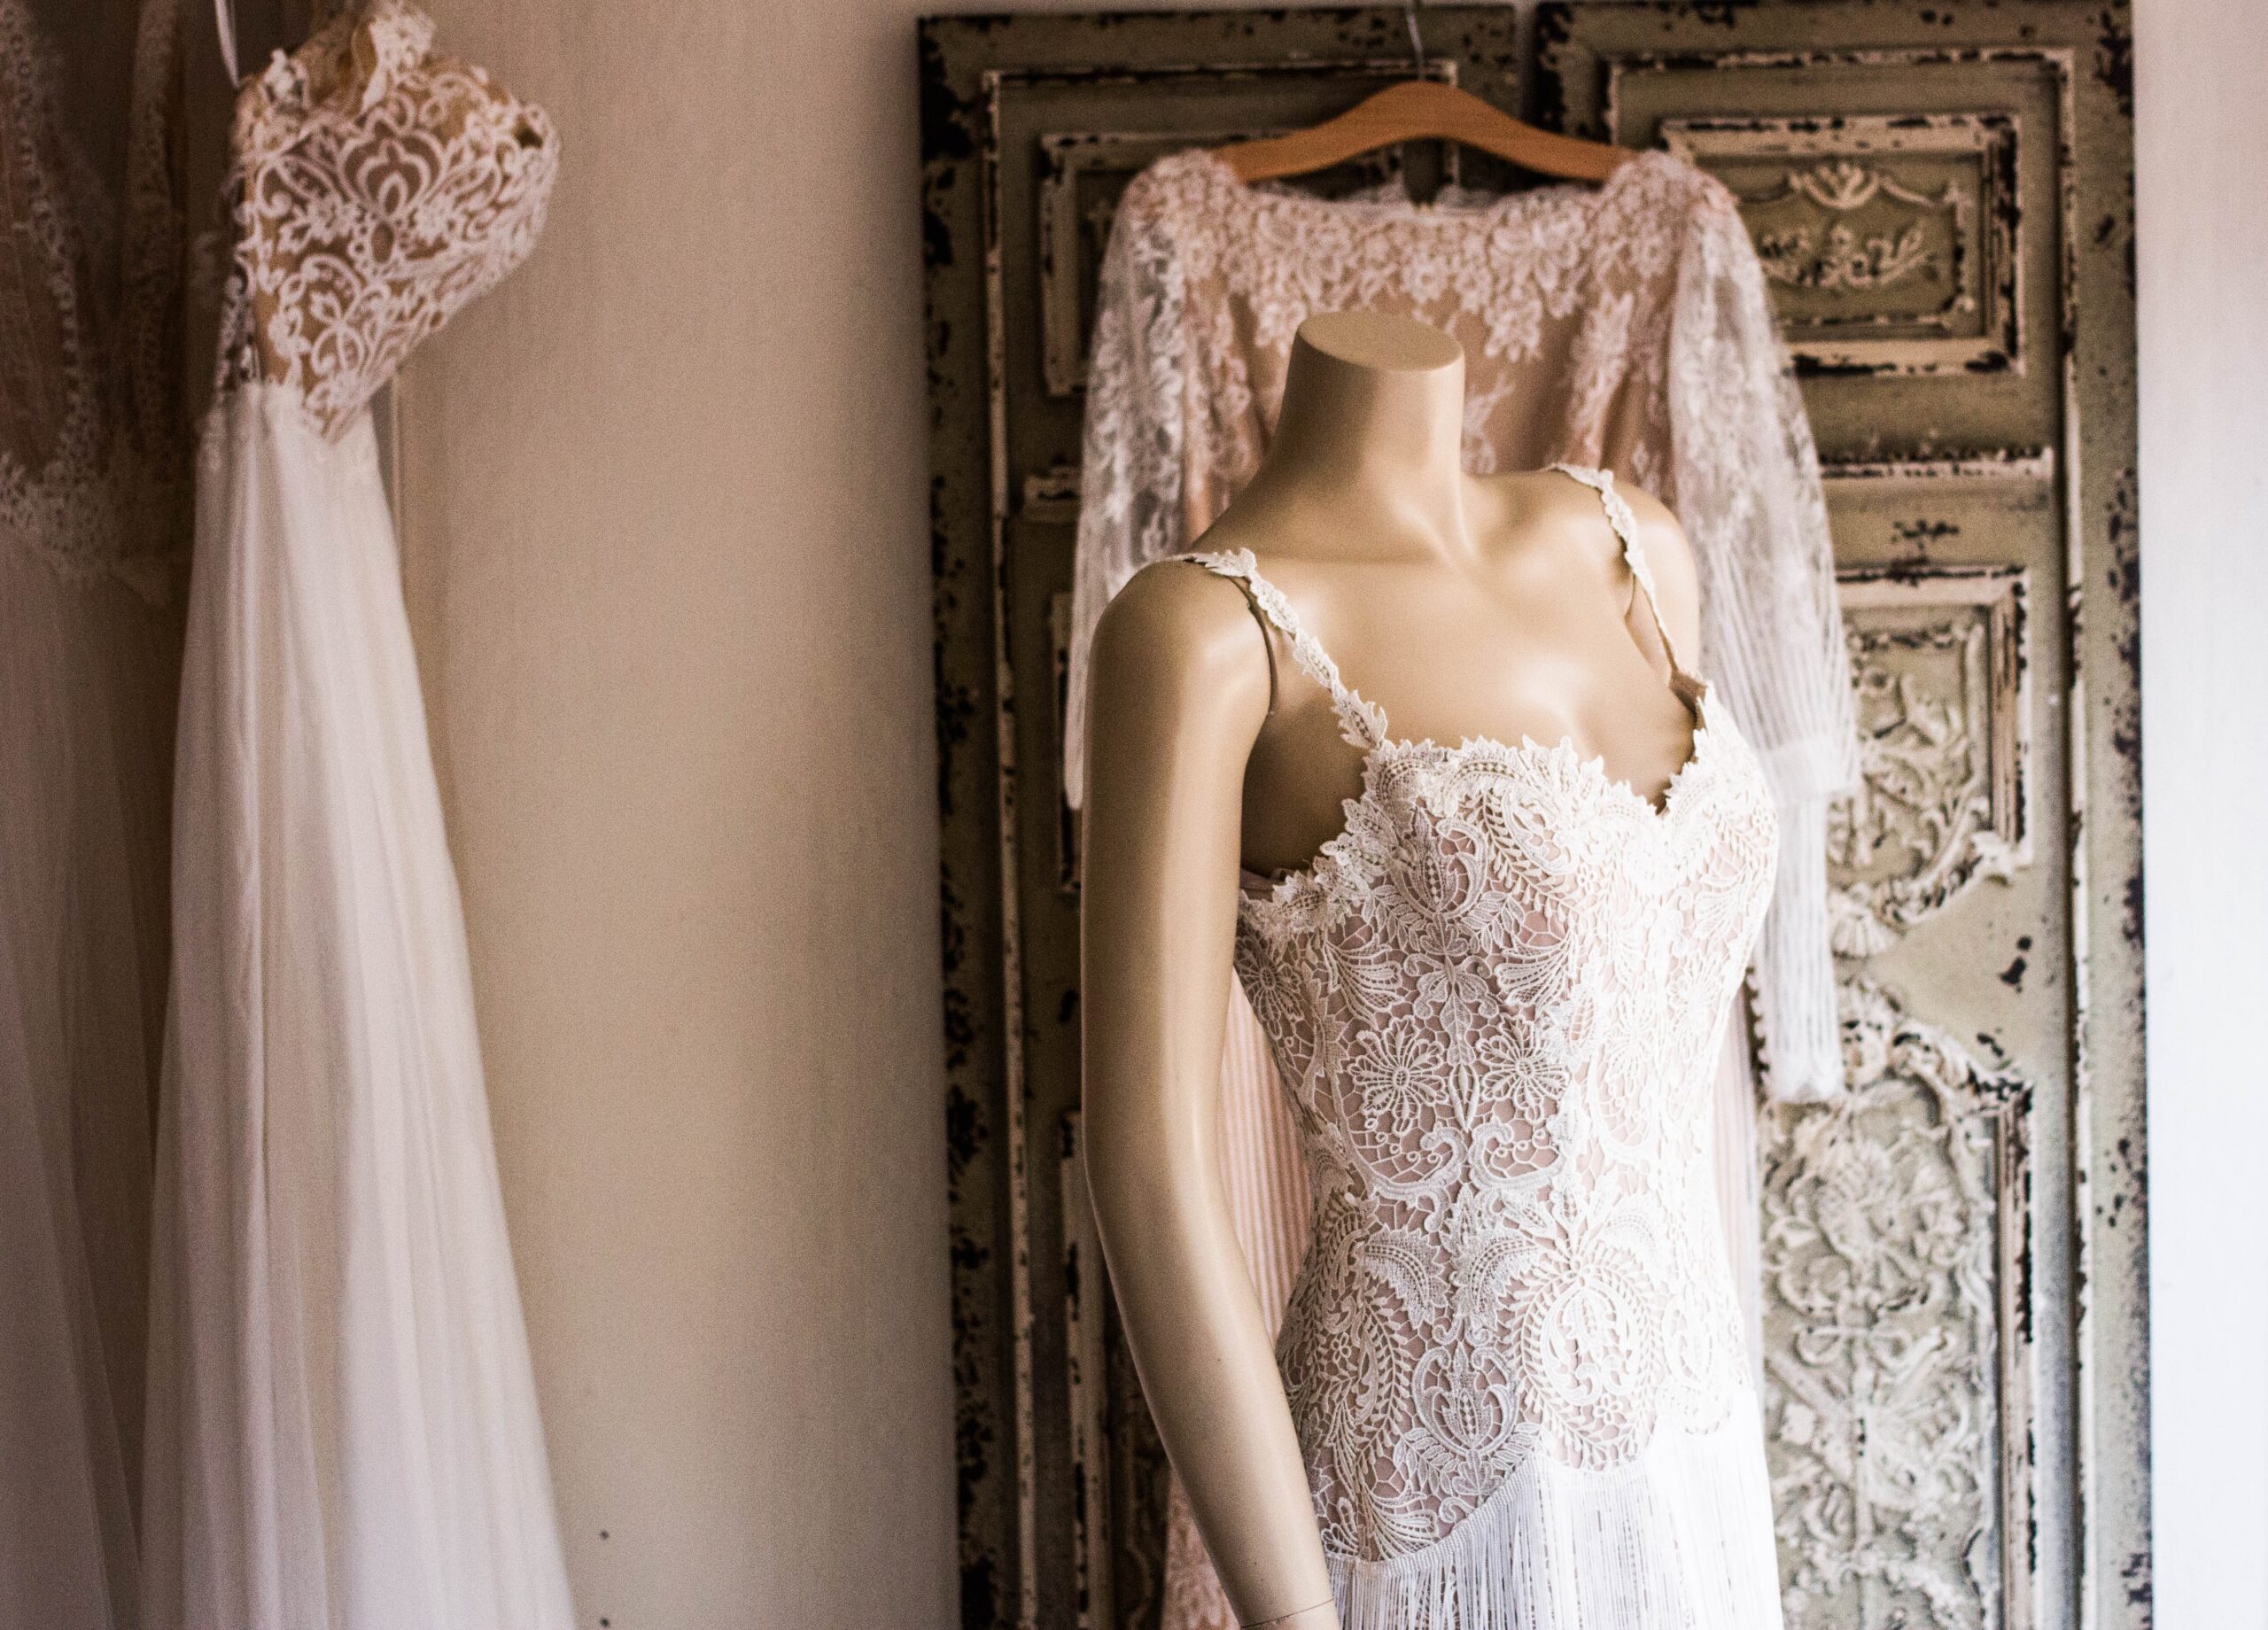 Wedding Dress Fitting and Alteration Etiquette